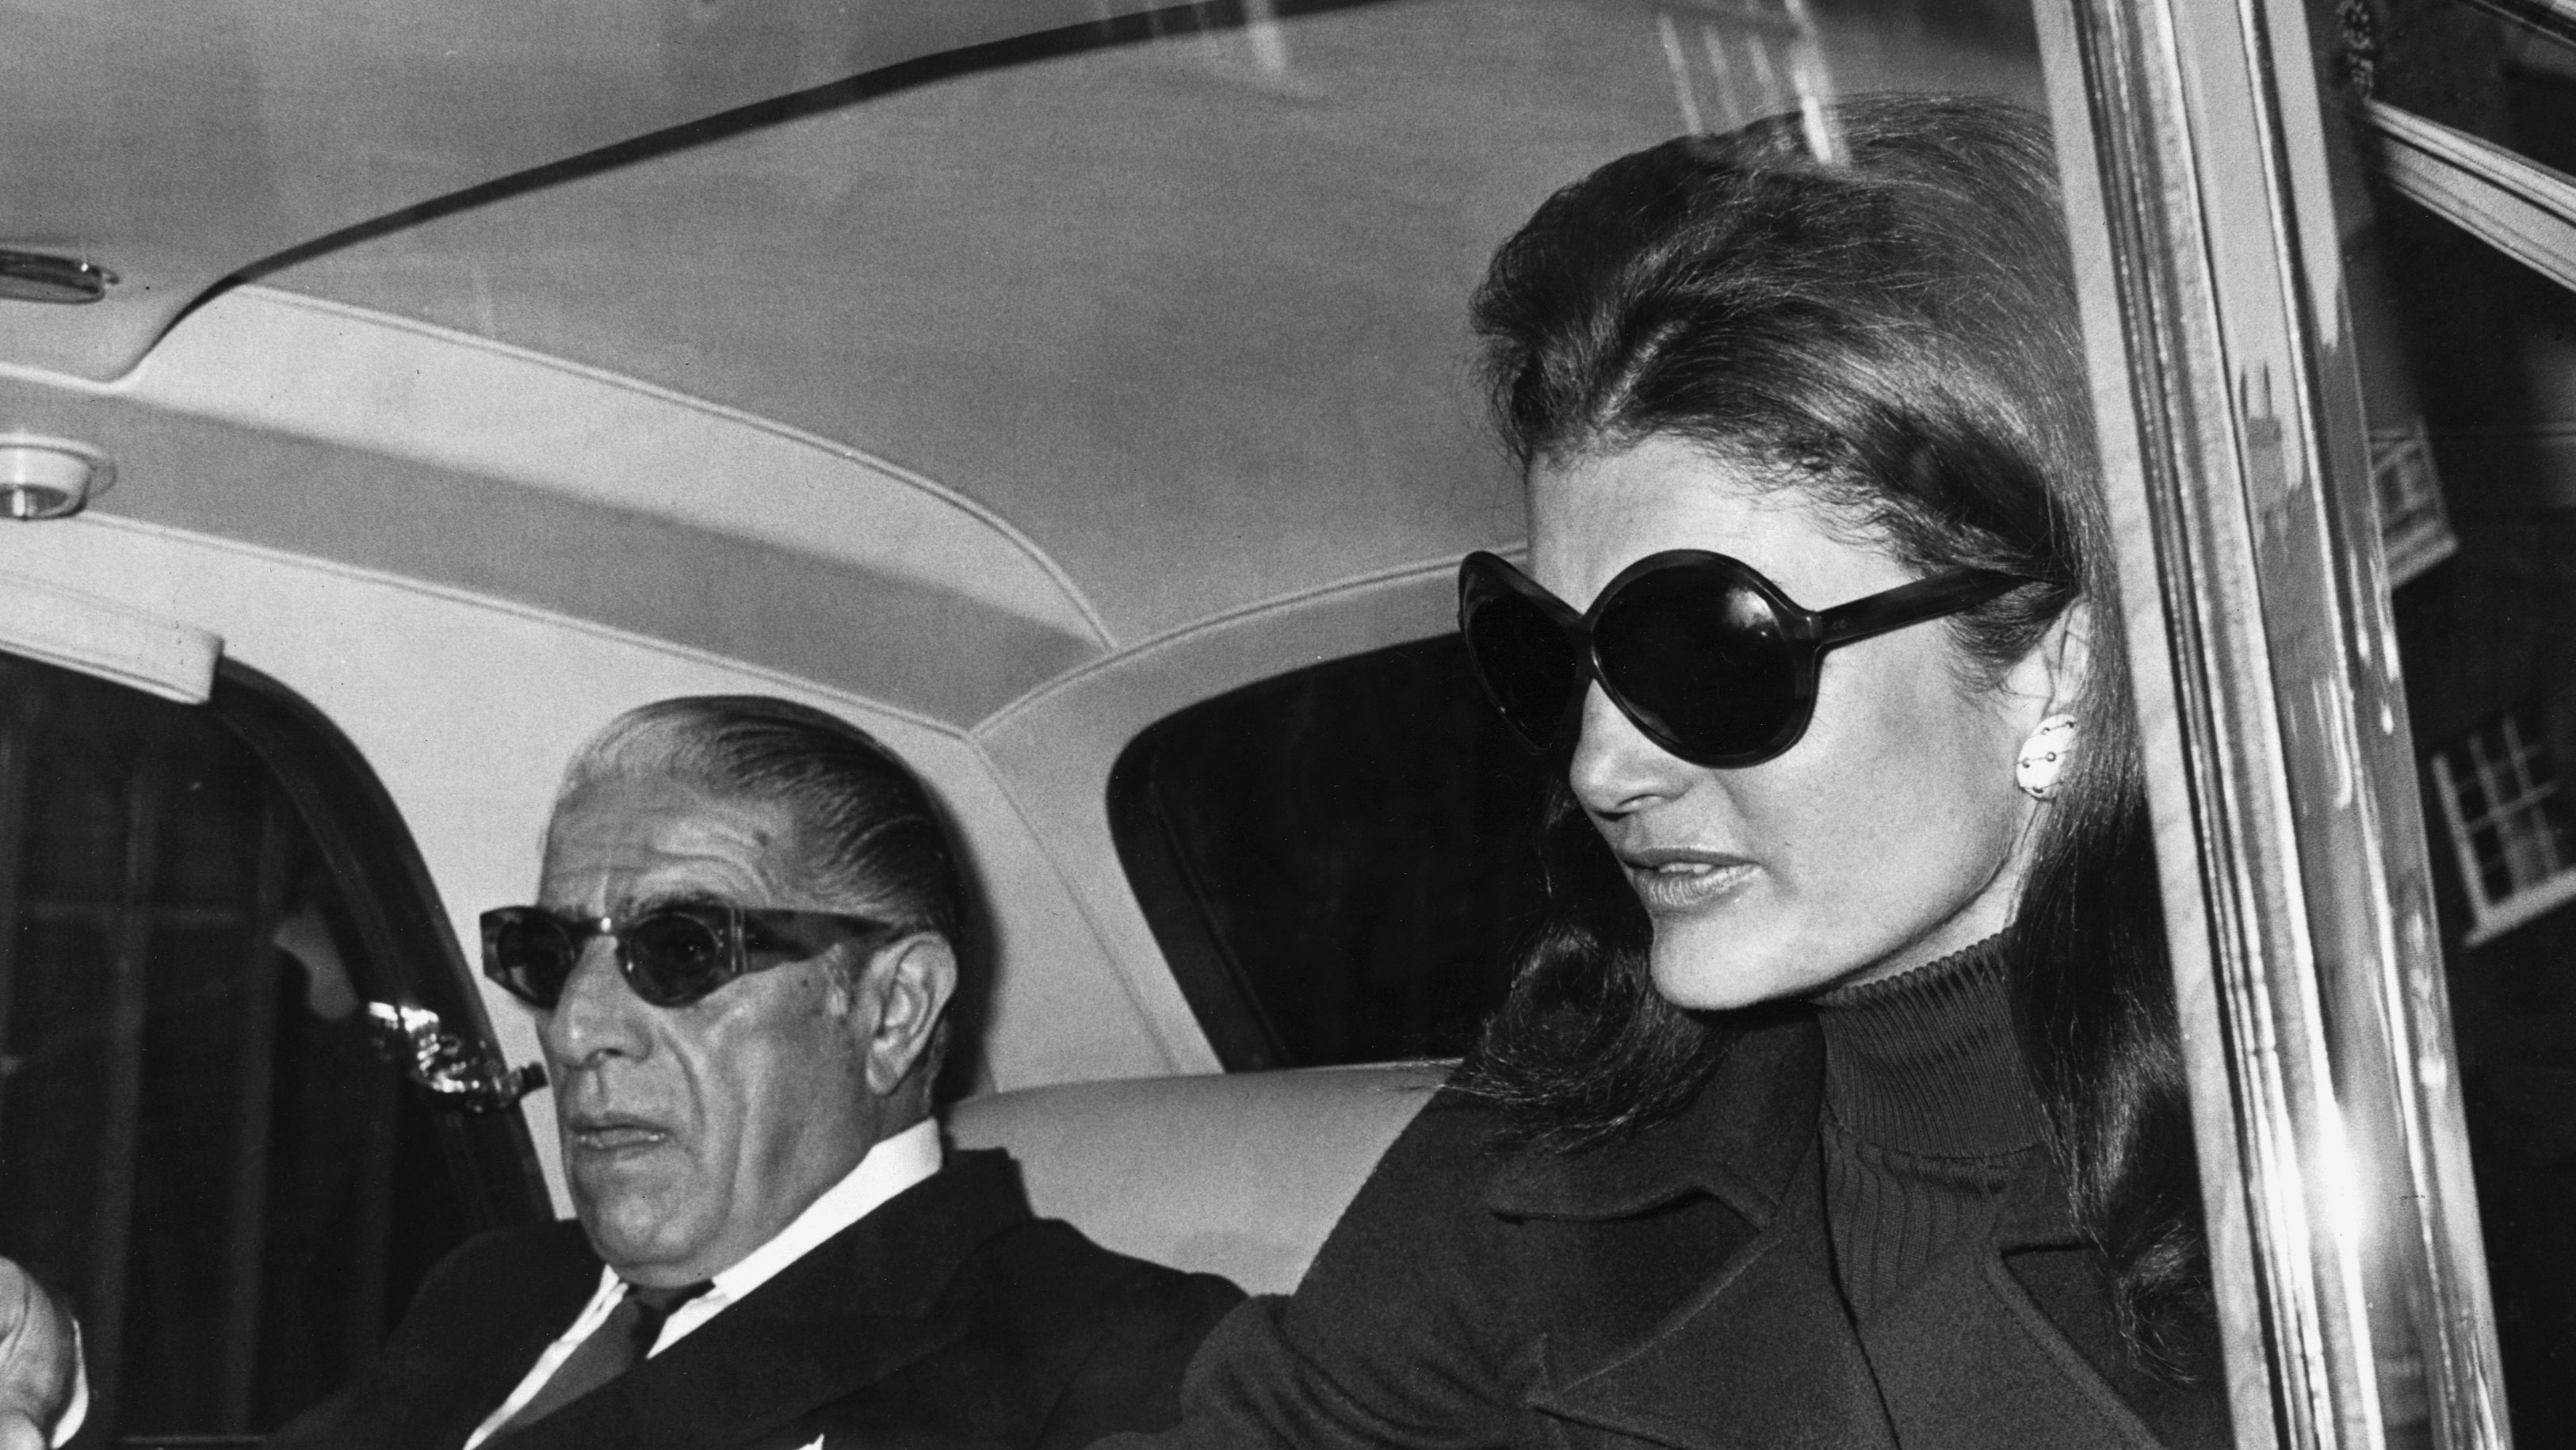 Jacqueline Sex Video - How Jackie Kennedy's Second Marriage Forever Changed Media and Porn -  InsideHook